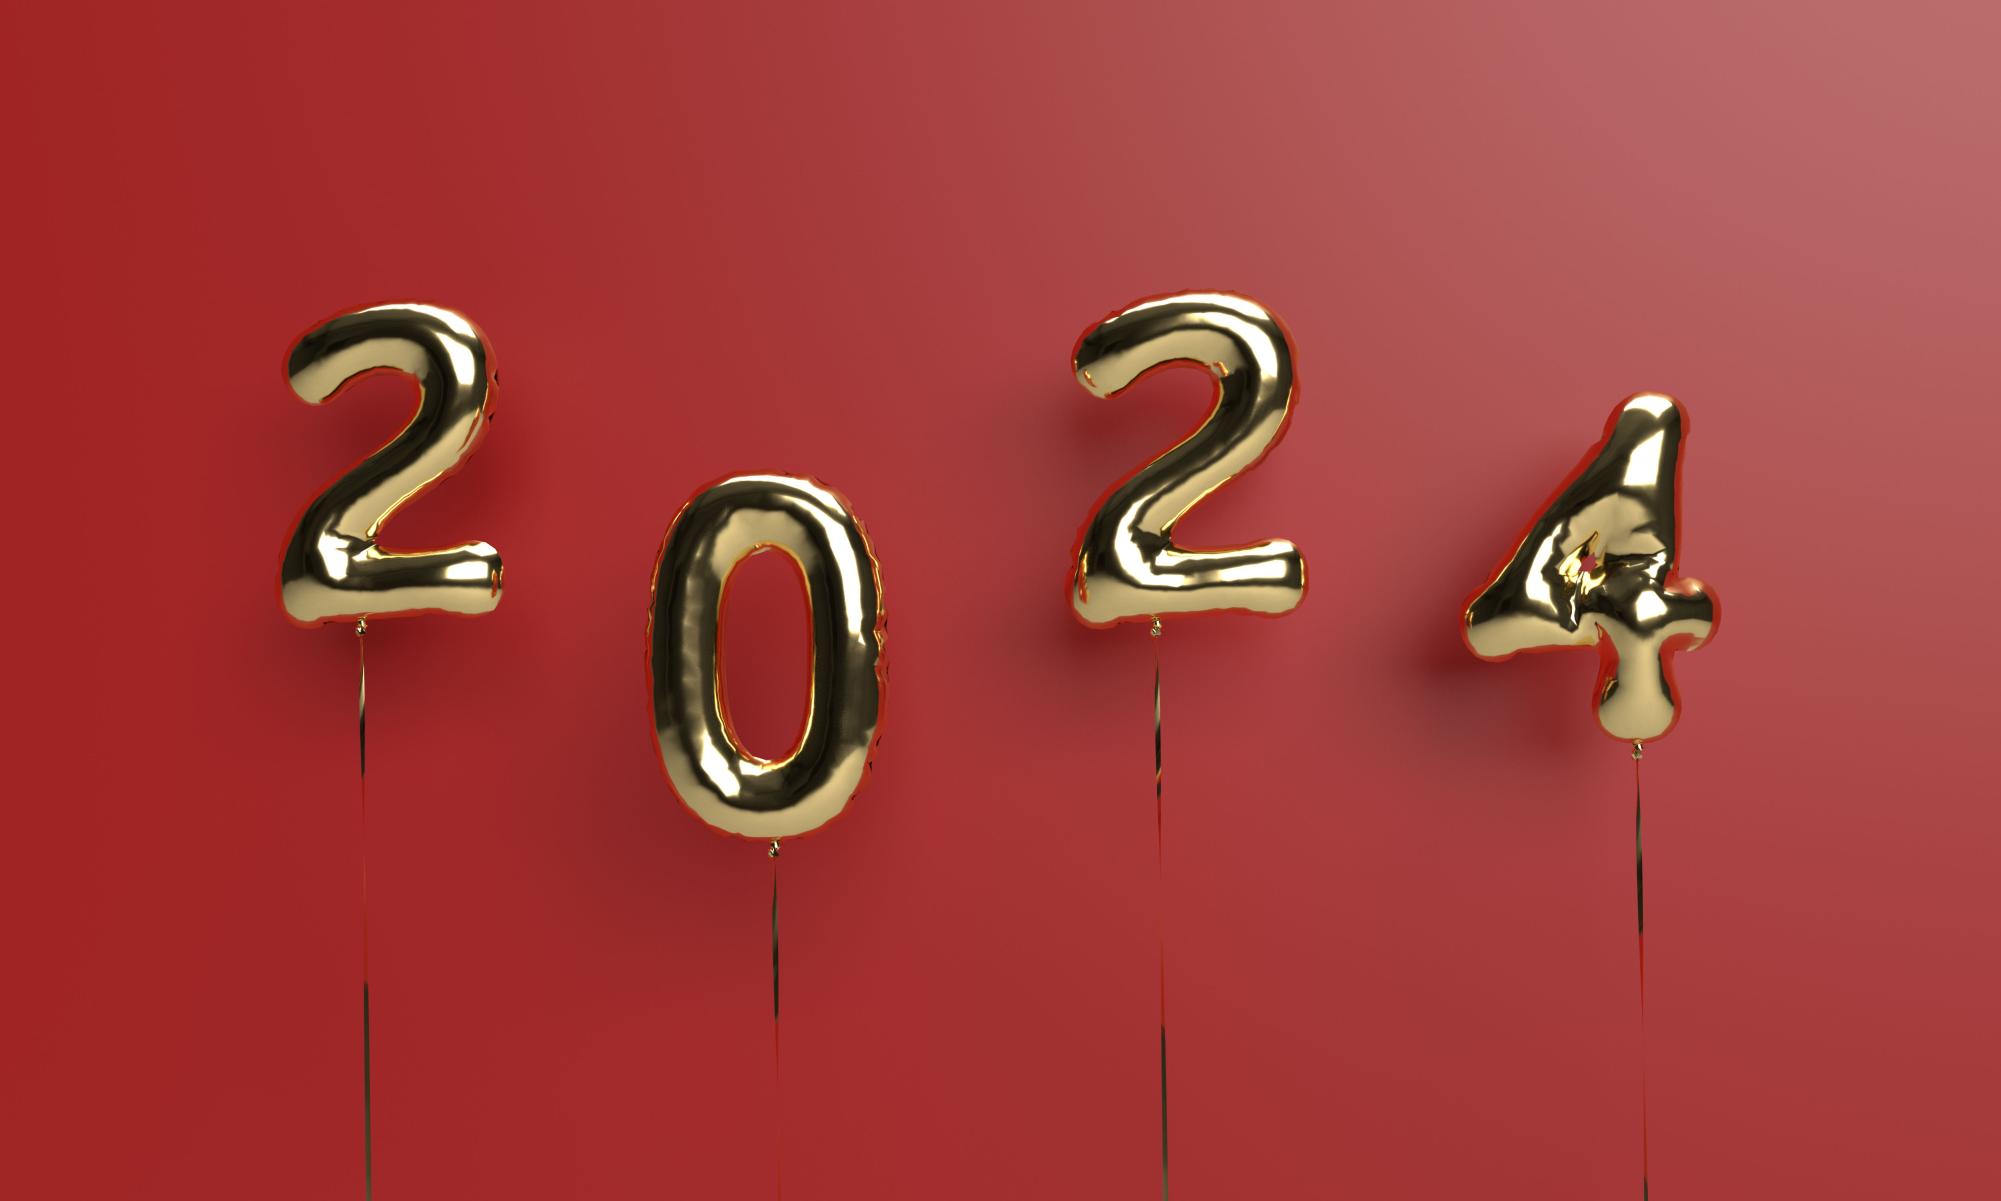 The Inkspot’s 2023 year in numbers